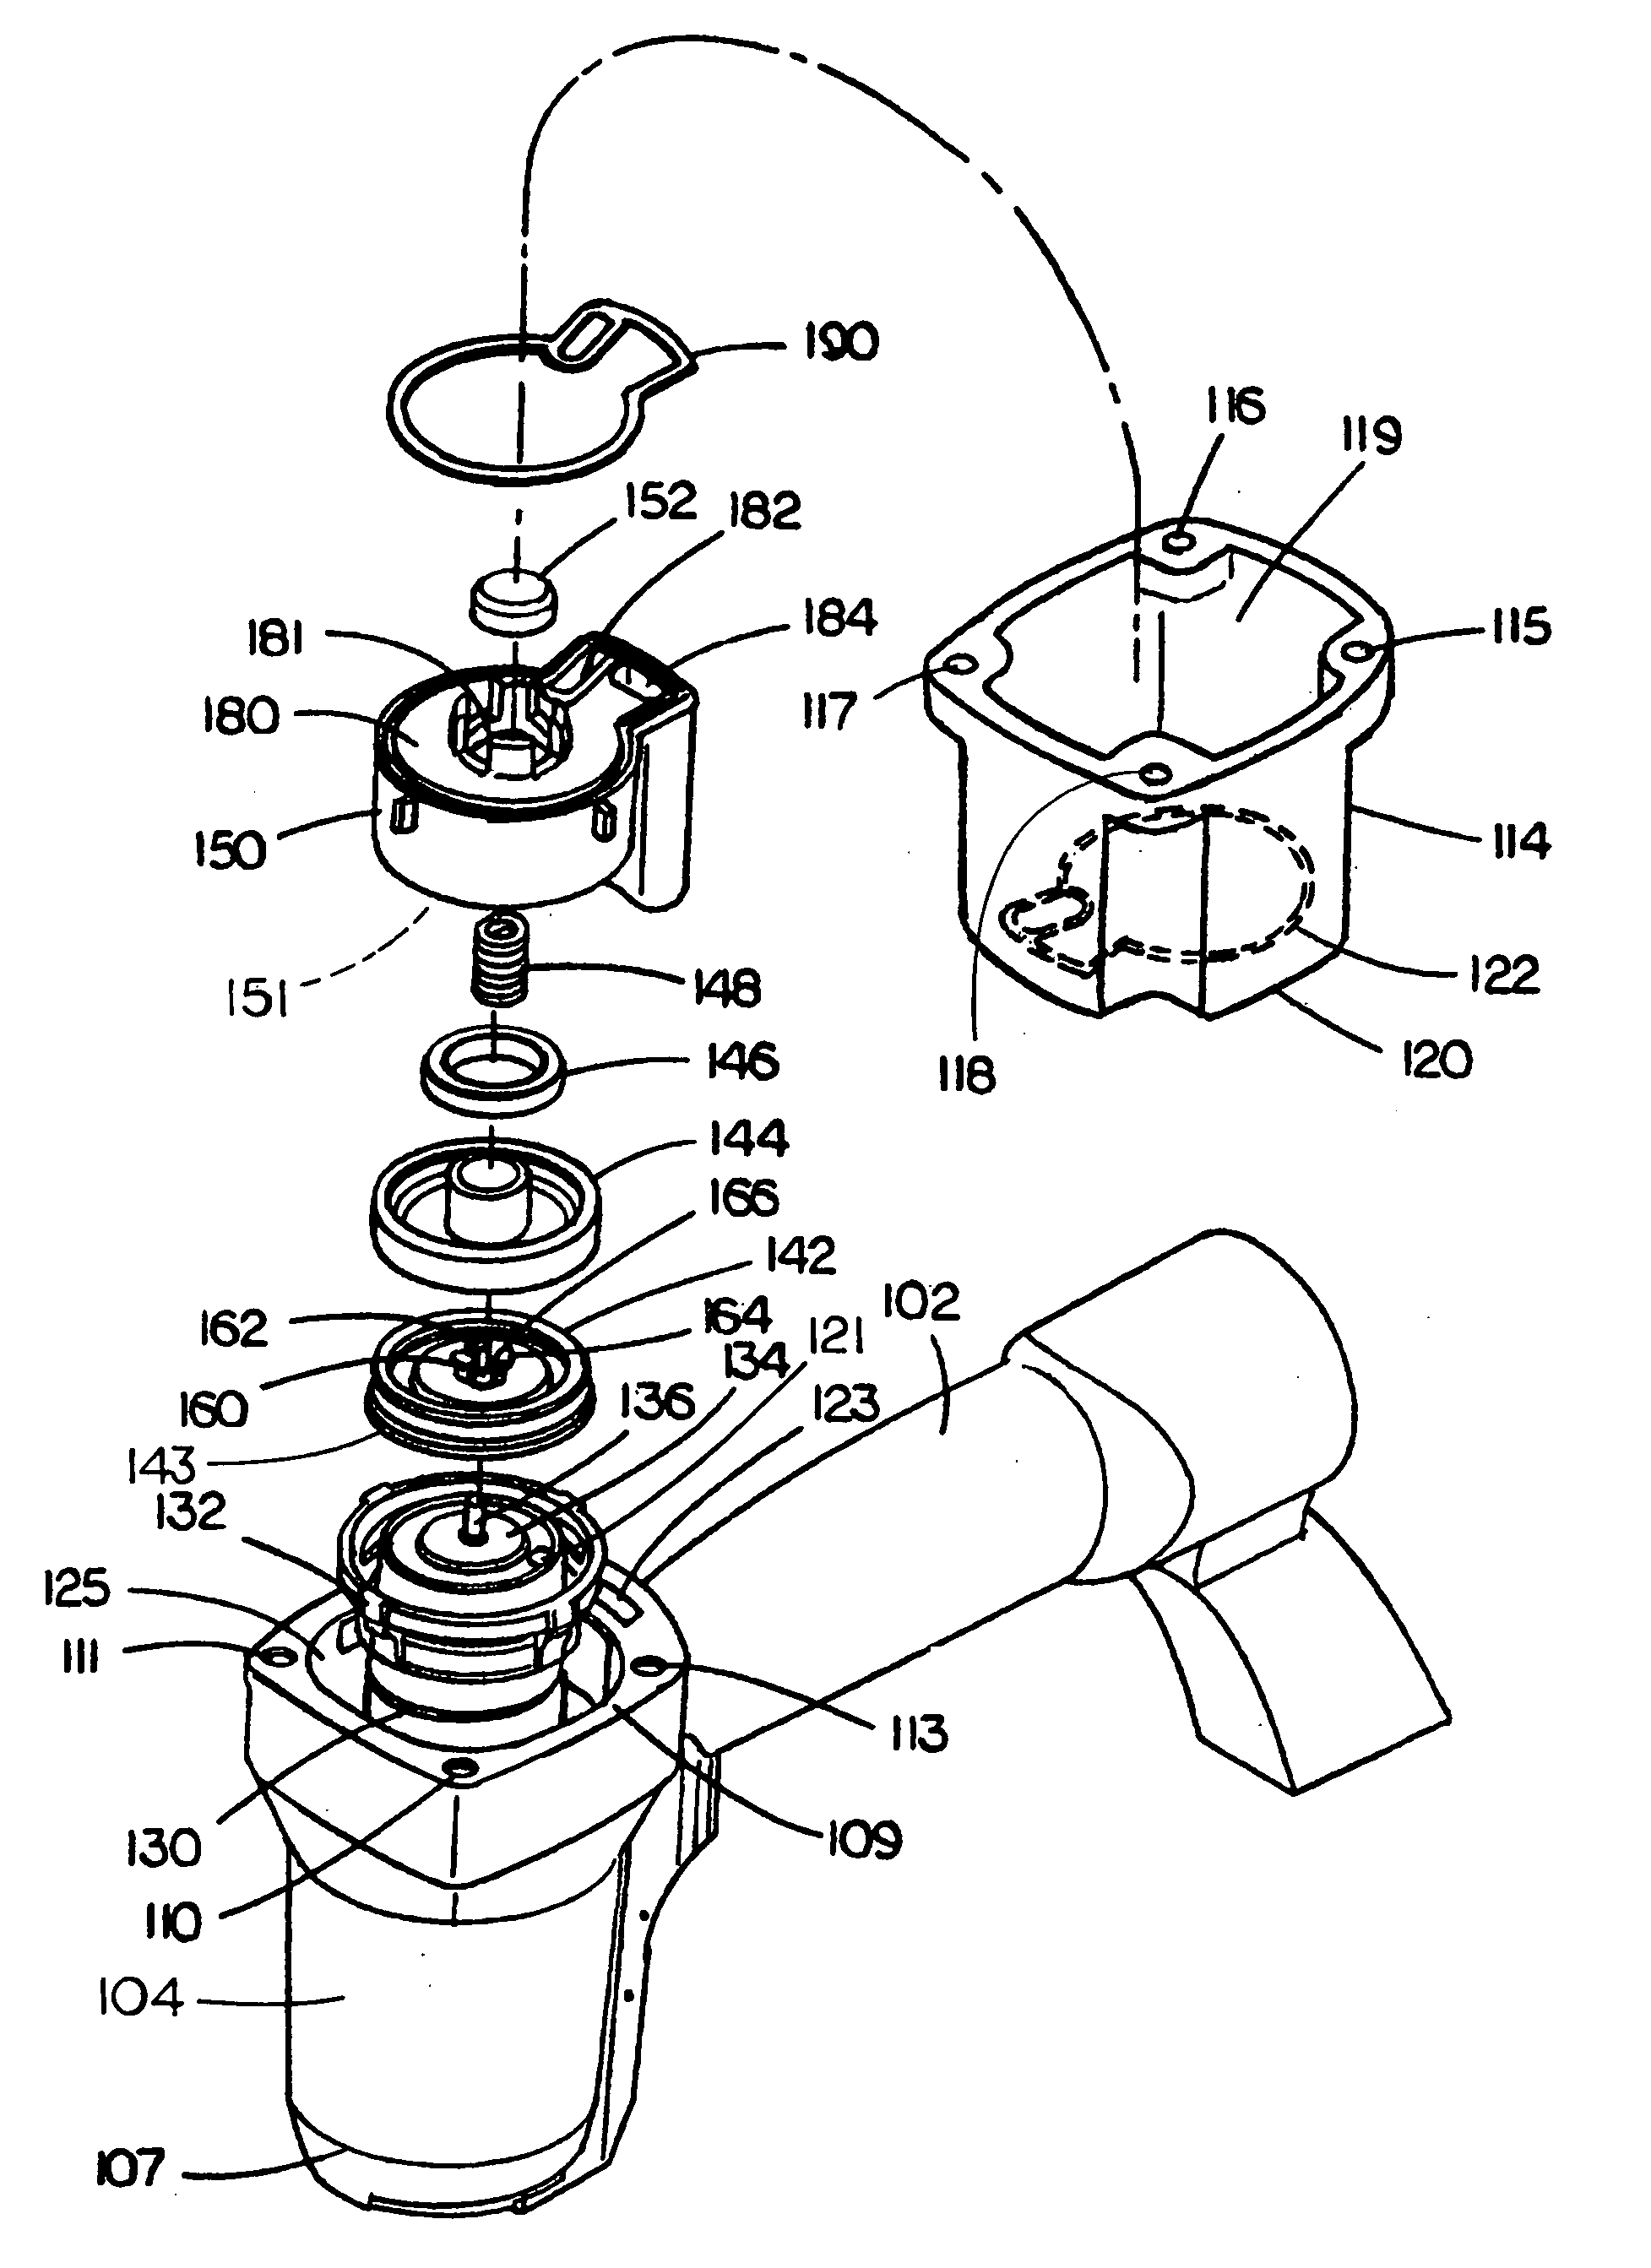 Adjustable exhaust assembly for pneumatic fasteners